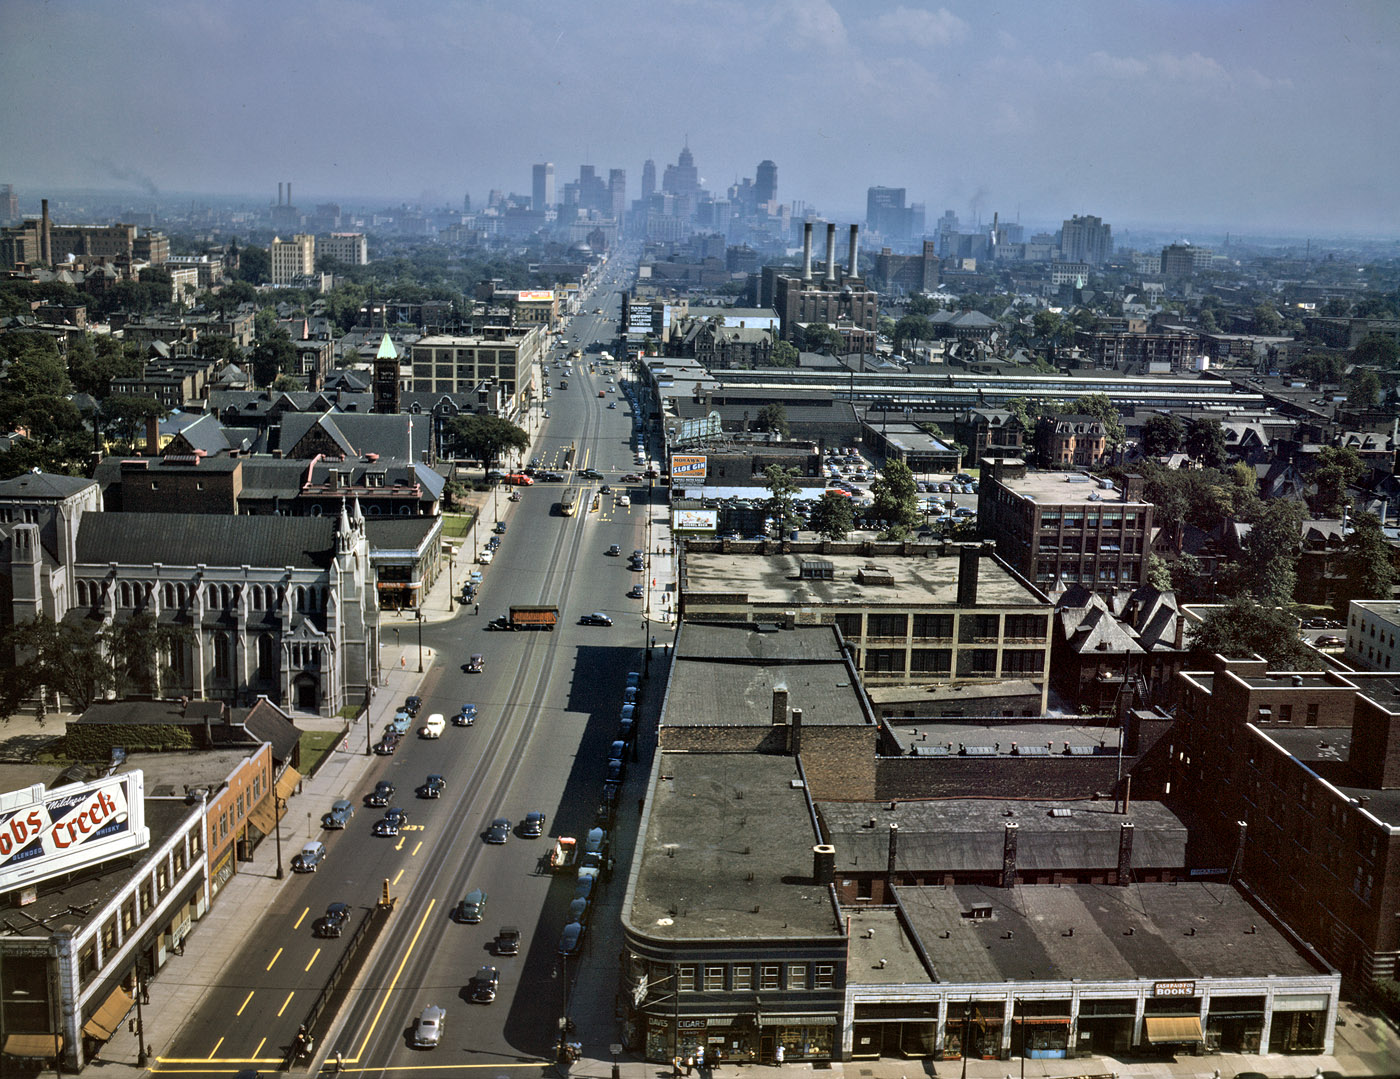 Requiem for Detroit – A film about what happens when Capitalism leaves the city